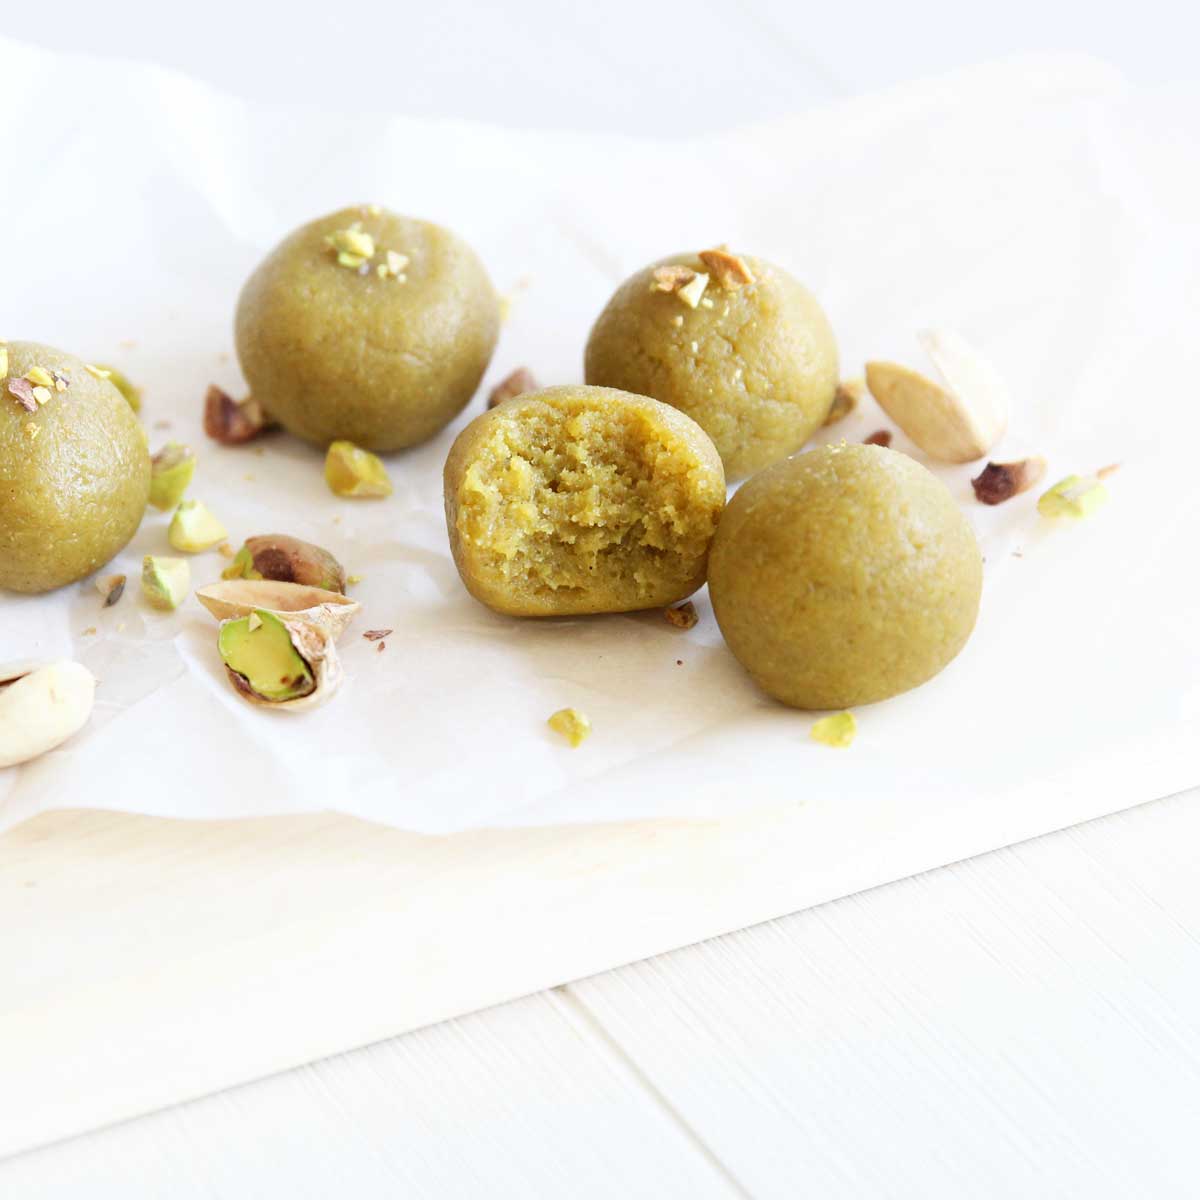 Keto Pistachio Cheesecake Protein Balls (Low Carb Energy Bites made with Collagen Peptides) - yeast bread